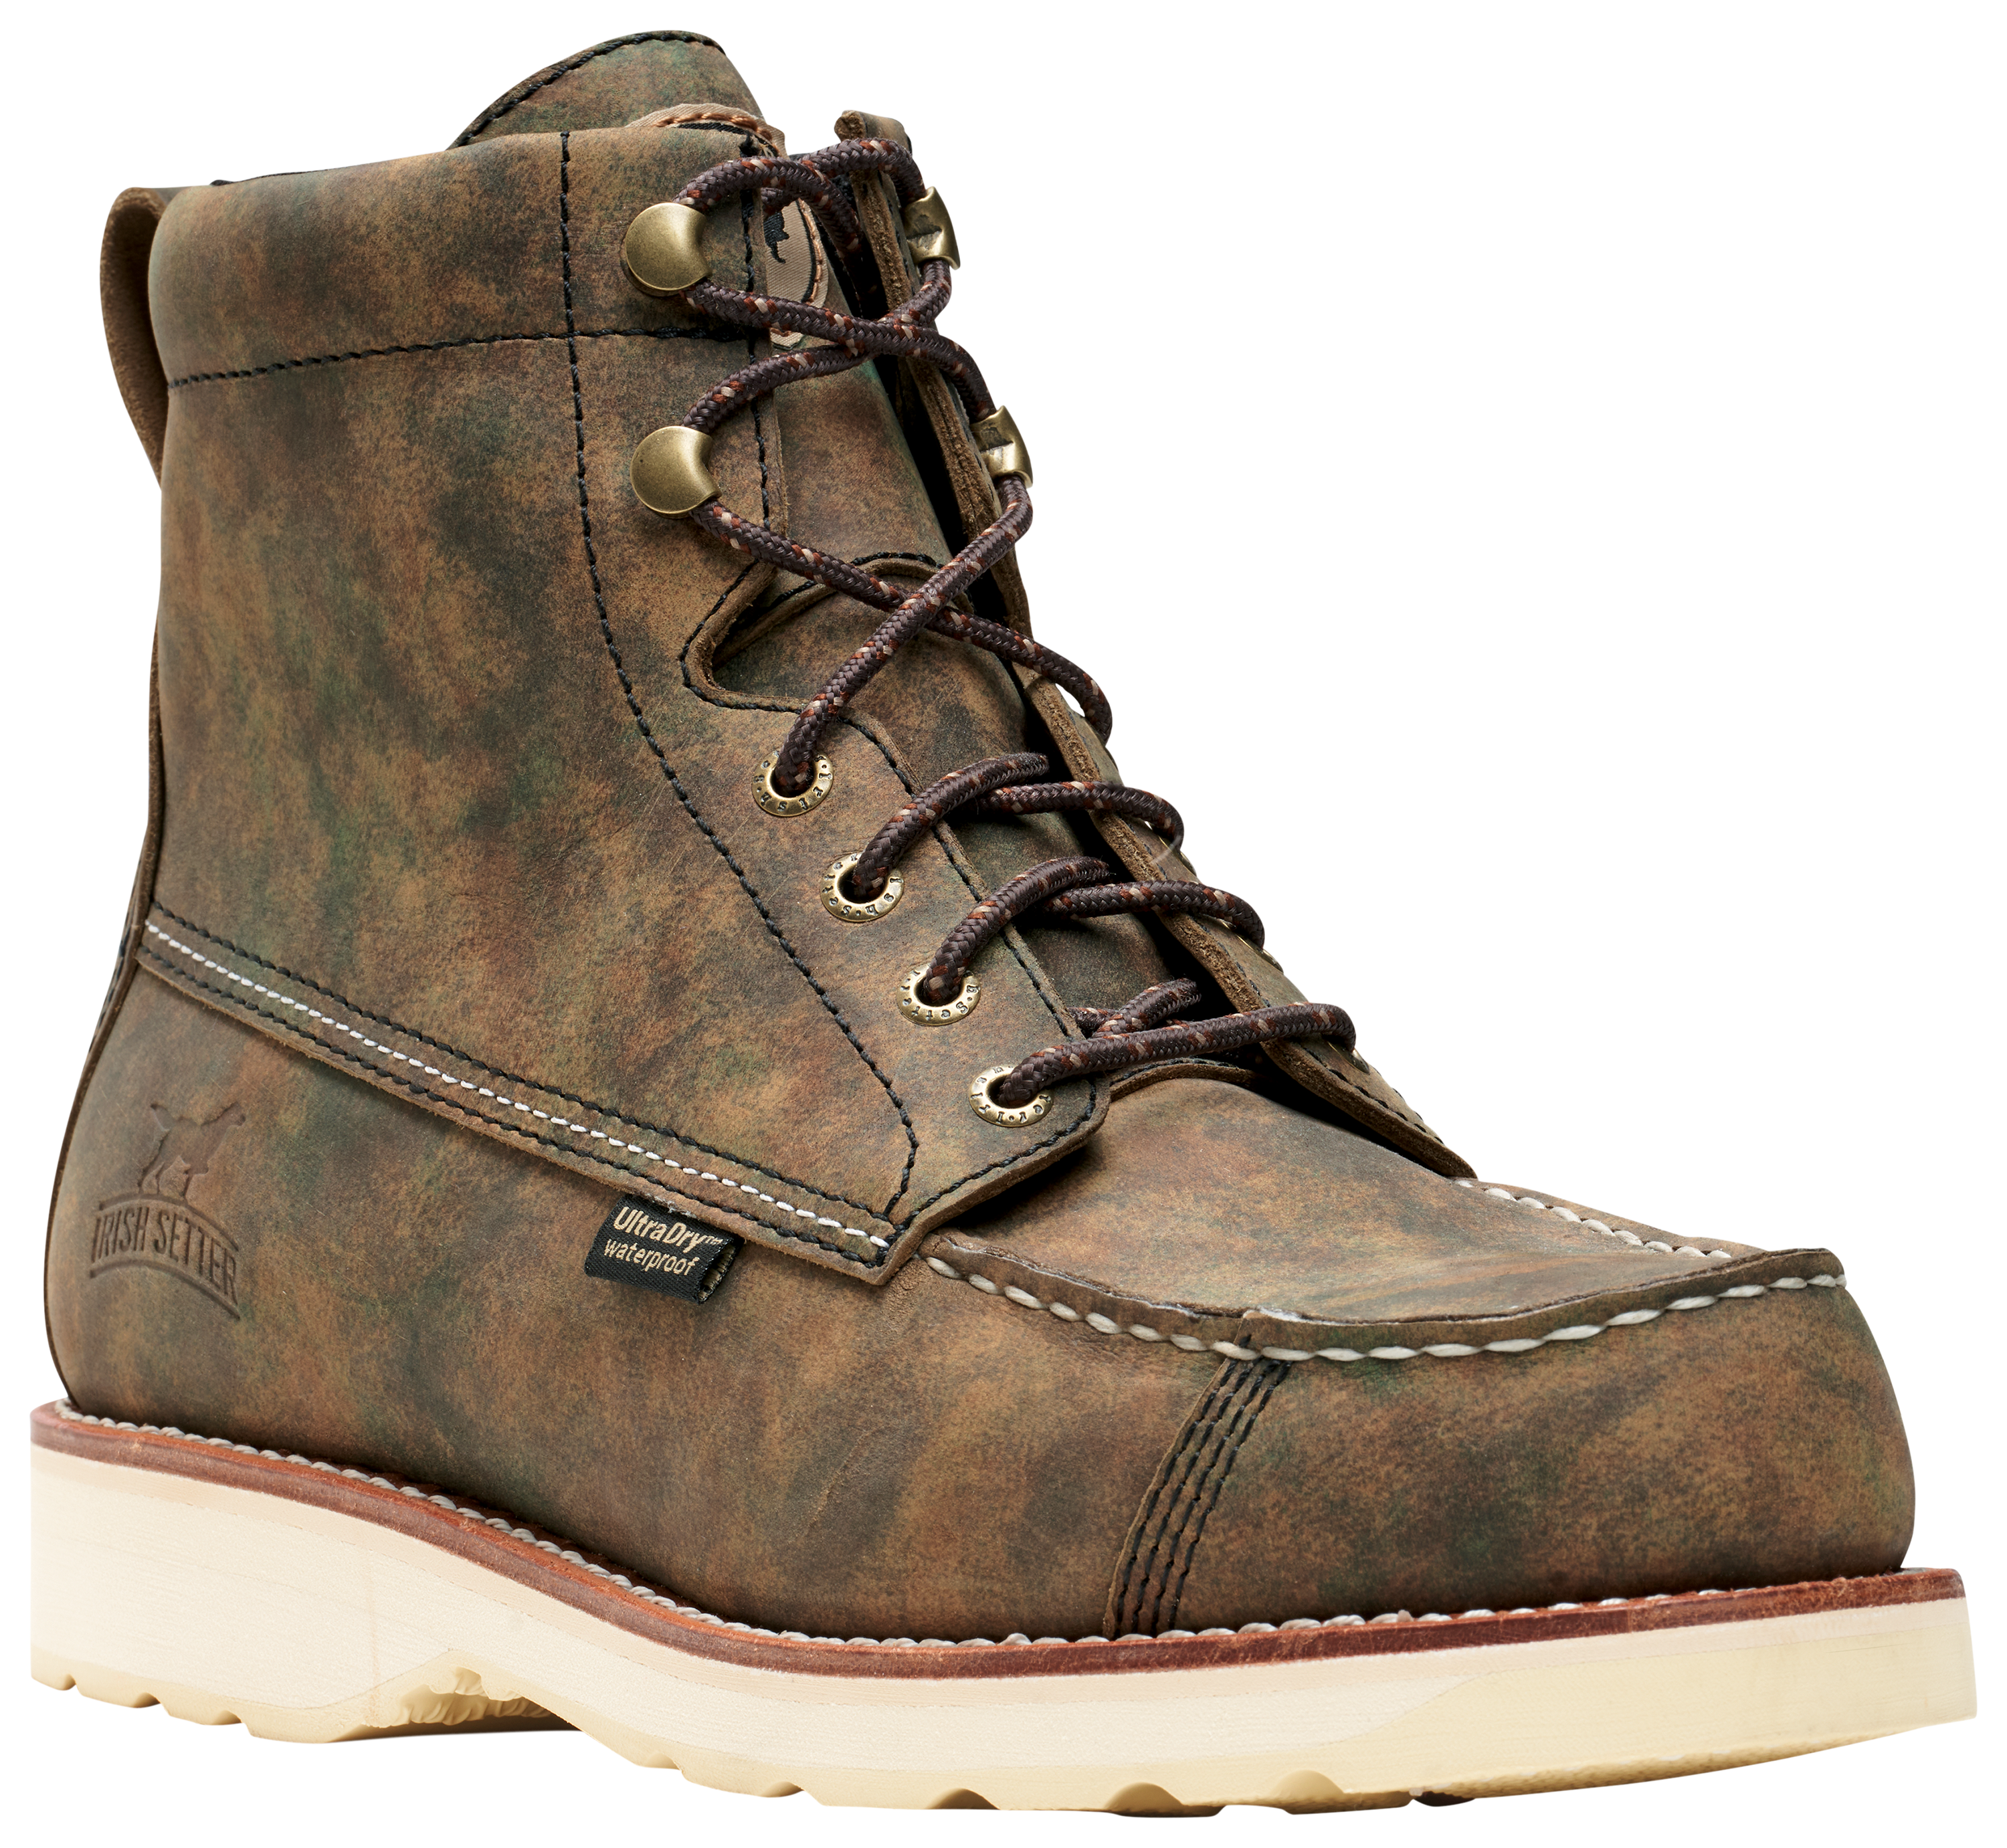 Irish Setter Wingshooter 7 Waterproof Hunting Boots for Men - Earth Camo - 8.5M